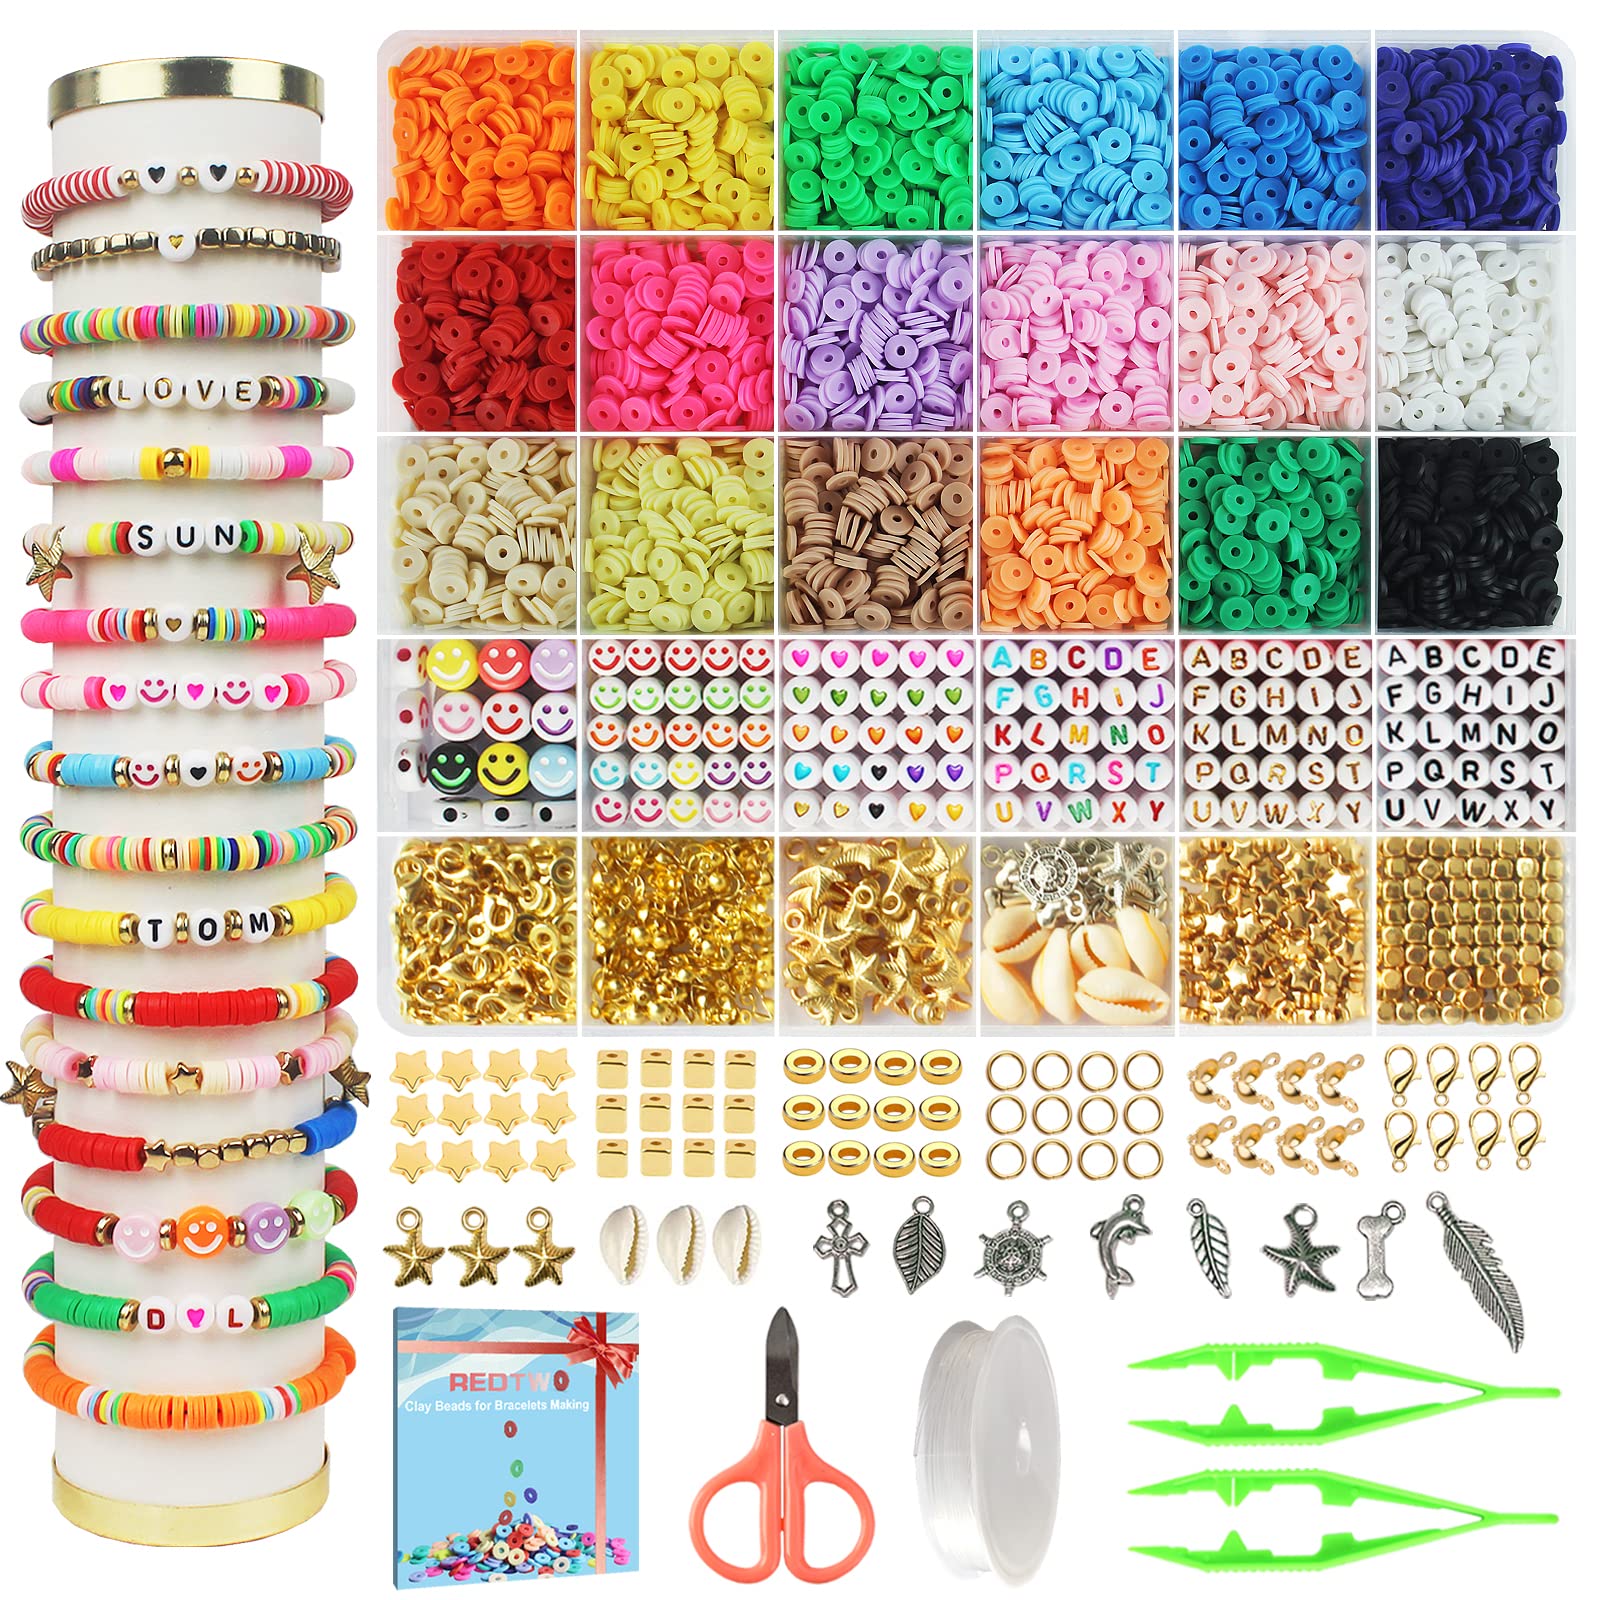 DIY My Craft Jewelry Jewelry Making Kit For Girls And Teens Charm